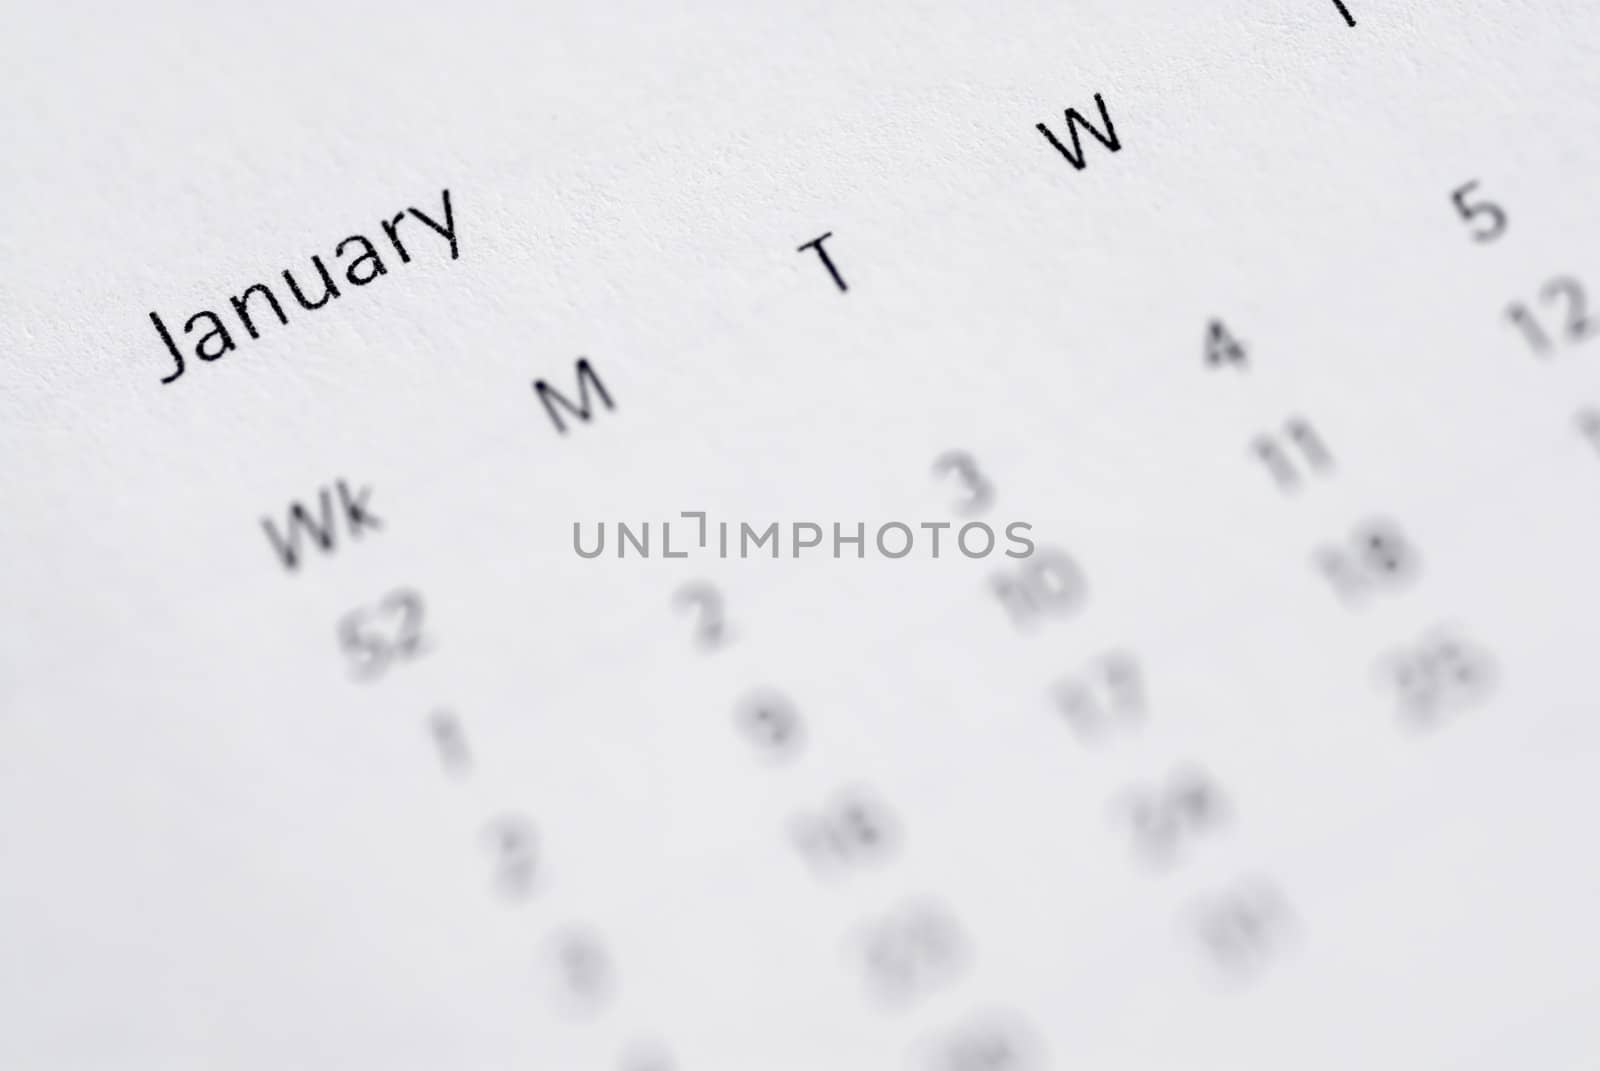 Focus on January, month view of diary.